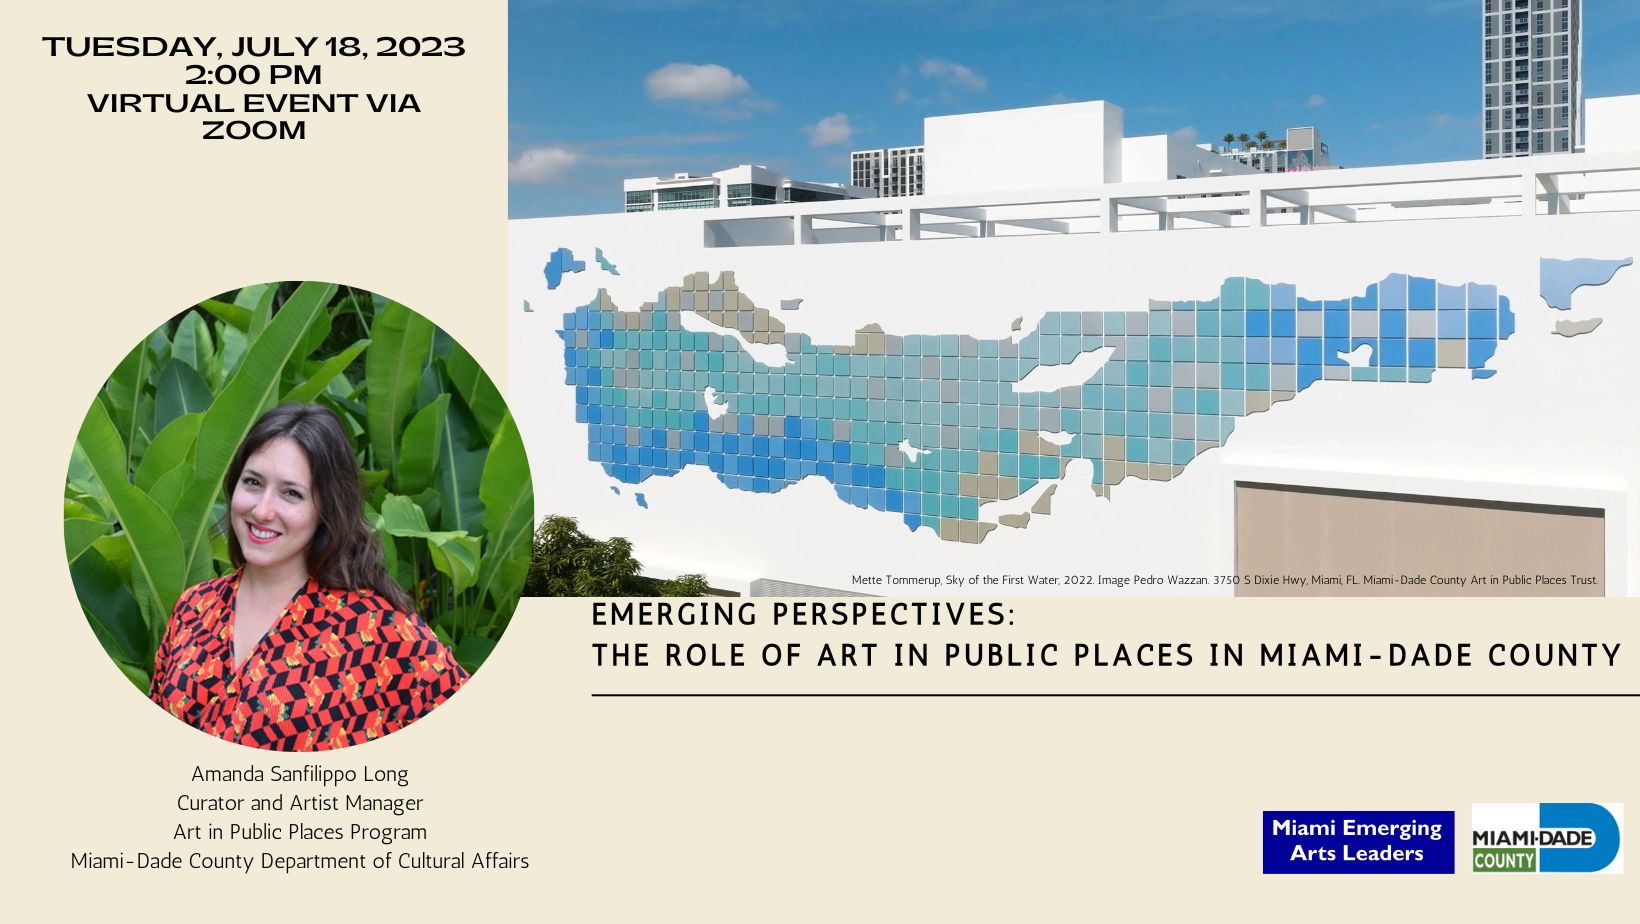 Miami Emerging Arts Leaders – Emerging Perspectives: The Role of Art in Public Places in Miami-Dade County